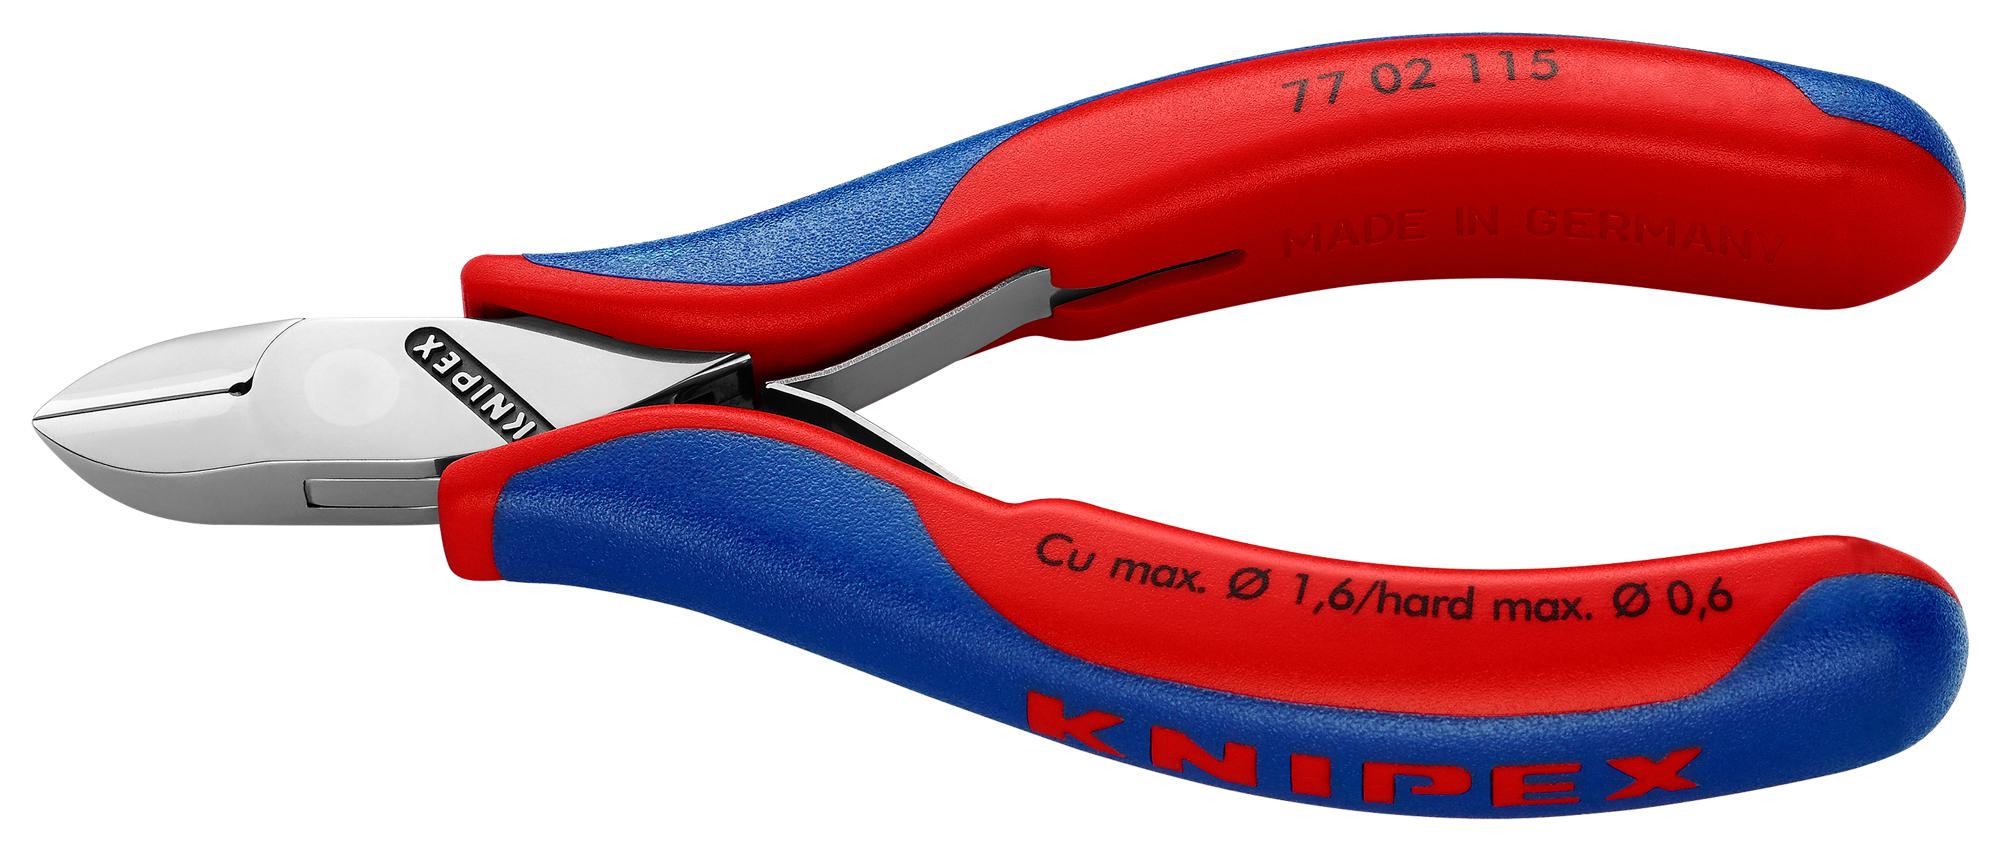 7702115 CUTTER, RED HANDLES KNIPEX